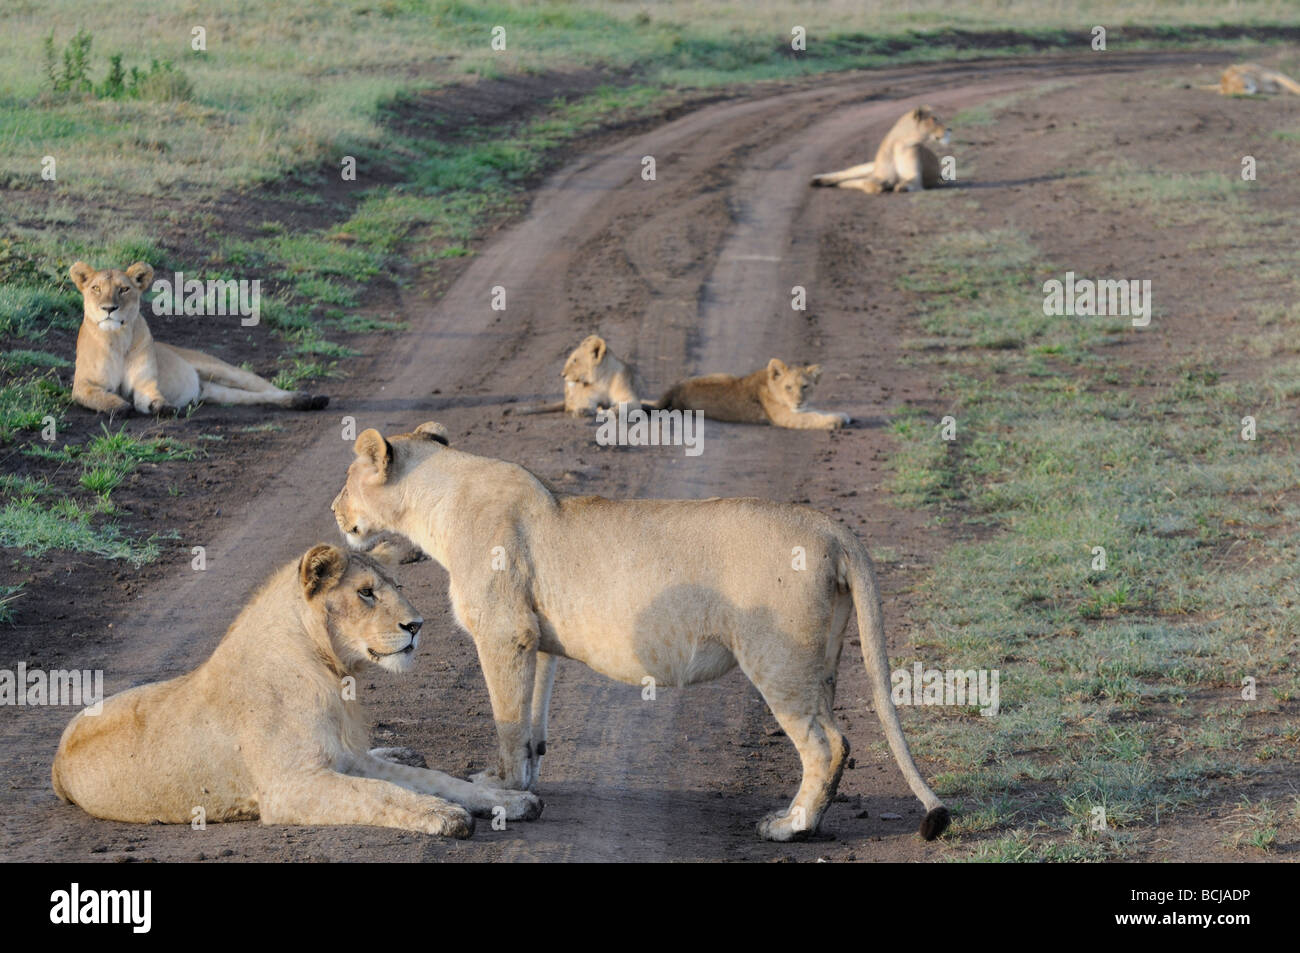 Stock photo of a pride of lions resting in the road, Serengeti National Park, Tanzania, February 2009. Stock Photo